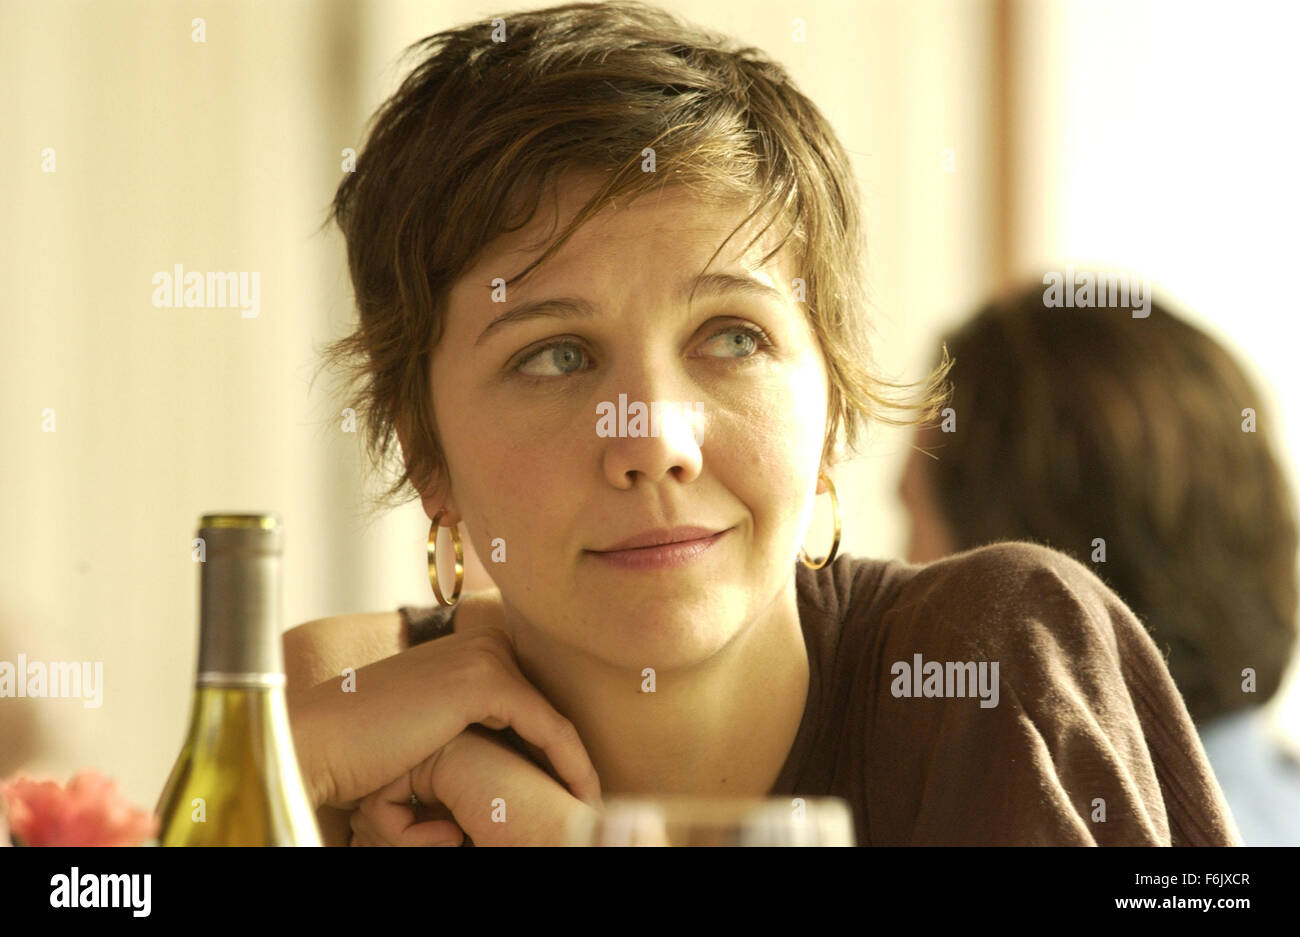 RELEASE DATE: April 22, 2005. MOVIE TITLE: The Great New Wonderful. STUDIO: Serenade Films. PLOT: The Great New Wonderful weaves five stories against the backdrop of an anxious and uncertain post-9-11 New York City. PICTURED: MAGGIE GYLLENHAAL stars as Emme. Stock Photo